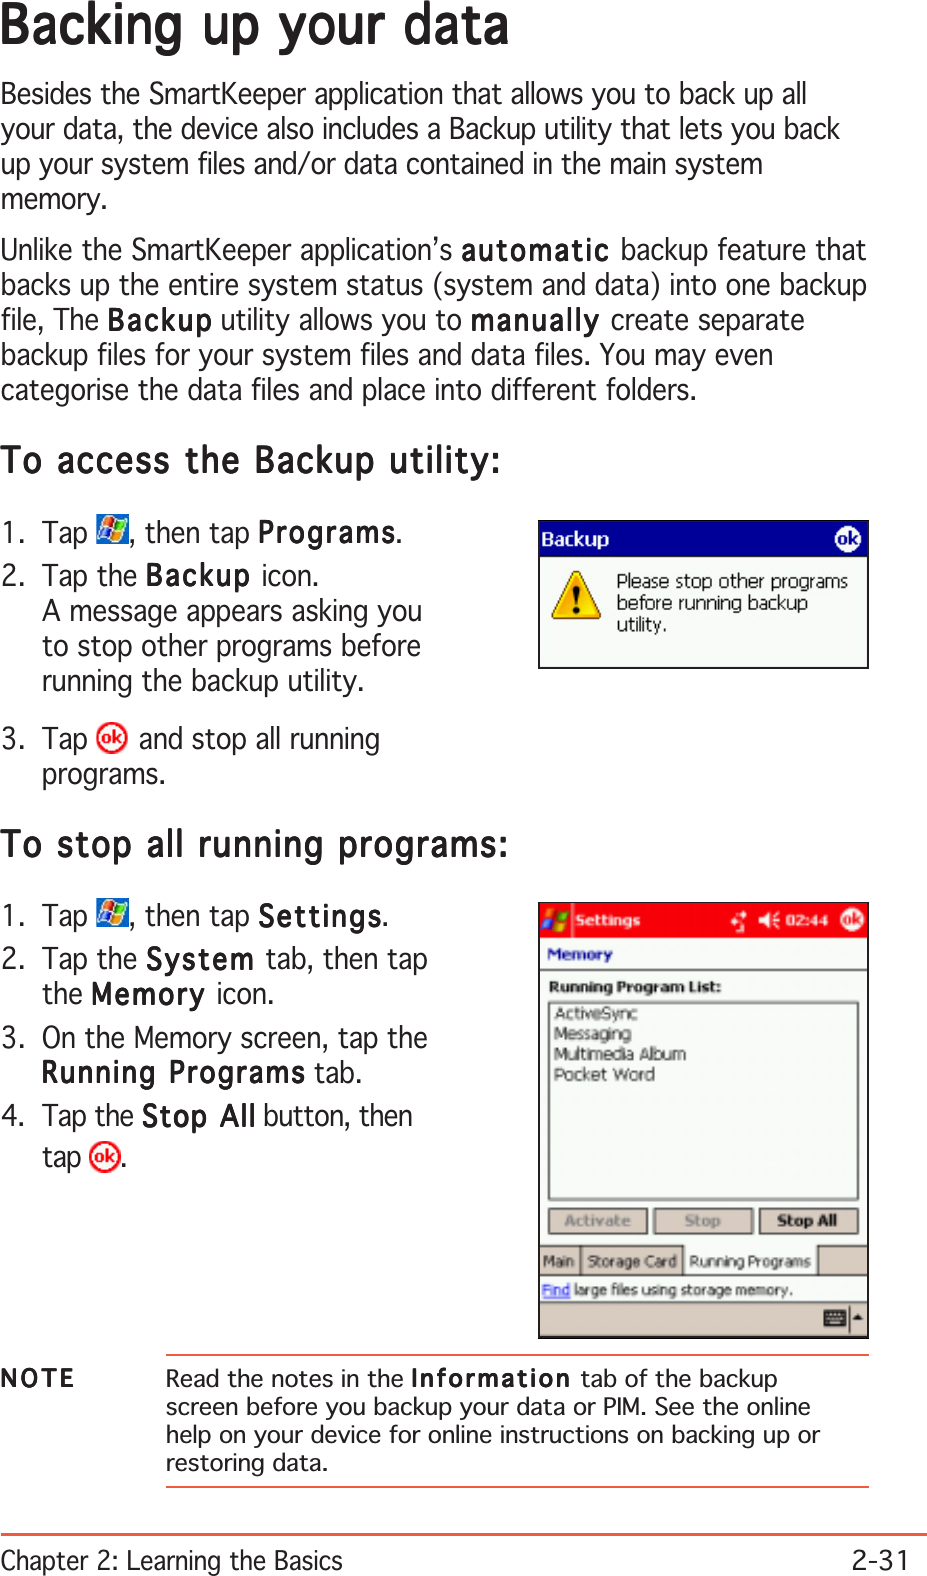 Chapter 2: Learning the Basics2-31NOTENOTENOTENOTEN O T E Read the notes in the InformationInformationInformationInformationInformation tab of the backupscreen before you backup your data or PIM. See the onlinehelp on your device for online instructions on backing up orrestoring data.Backing up your dataBacking up your dataBacking up your dataBacking up your dataBacking up your dataBesides the SmartKeeper application that allows you to back up allyour data, the device also includes a Backup utility that lets you backup your system files and/or data contained in the main systemmemory.Unlike the SmartKeeper application’s automaticautomaticautomaticautomaticautomatic backup feature thatbacks up the entire system status (system and data) into one backupfile, The BackupBackupBackupBackupBac kup utility allows you to manuallymanuallymanuallymanuallymanually create separatebackup files for your system files and data files. You may evencategorise the data files and place into different folders.To access the Backup utility:To access the Backup utility:To access the Backup utility:To access the Backup utility:To access the Backup utility:1. Tap  , then tap ProgramsProgramsProgramsProgramsPrograms.2. Tap the BackupBackupBackupBackupBackup icon.A message appears asking youto stop other programs beforerunning the backup utility.3. Tap   and stop all runningprograms.To stop all running programs:To stop all running programs:To stop all running programs:To stop all running programs:To stop all running programs:1. Tap  , then tap SettingsSettingsSettingsSettingsSettings.2. Tap the SystemSystemSystemSystemSystem tab, then tapthe MemoryMemoryMemoryMemoryMemory icon.3. On the Memory screen, tap theRunning ProgramsRunning ProgramsRunning ProgramsRunning ProgramsRunning Programs tab.4. Tap the Stop AllStop AllStop AllStop AllStop All button, thentap .